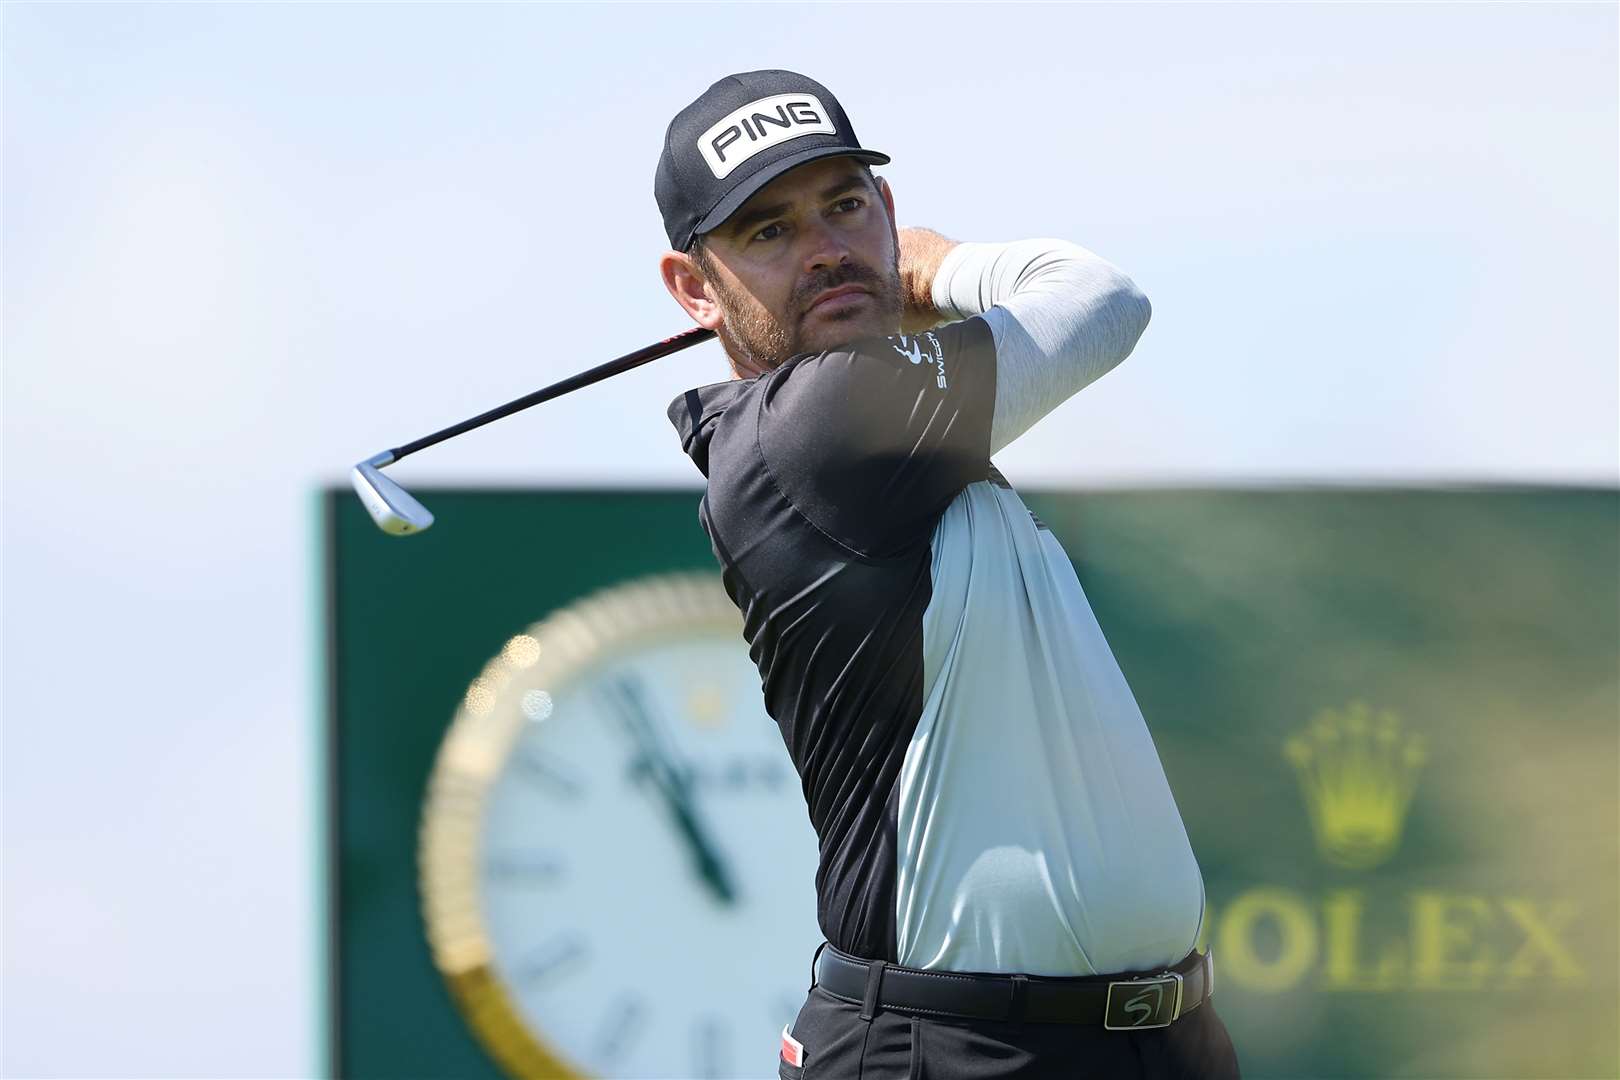 Louis Oosthuizen of South Africa tees off on the 5th hole and was in the lead at the end of Day One. Photo by Warren Little/R&A/R&A via Getty Images